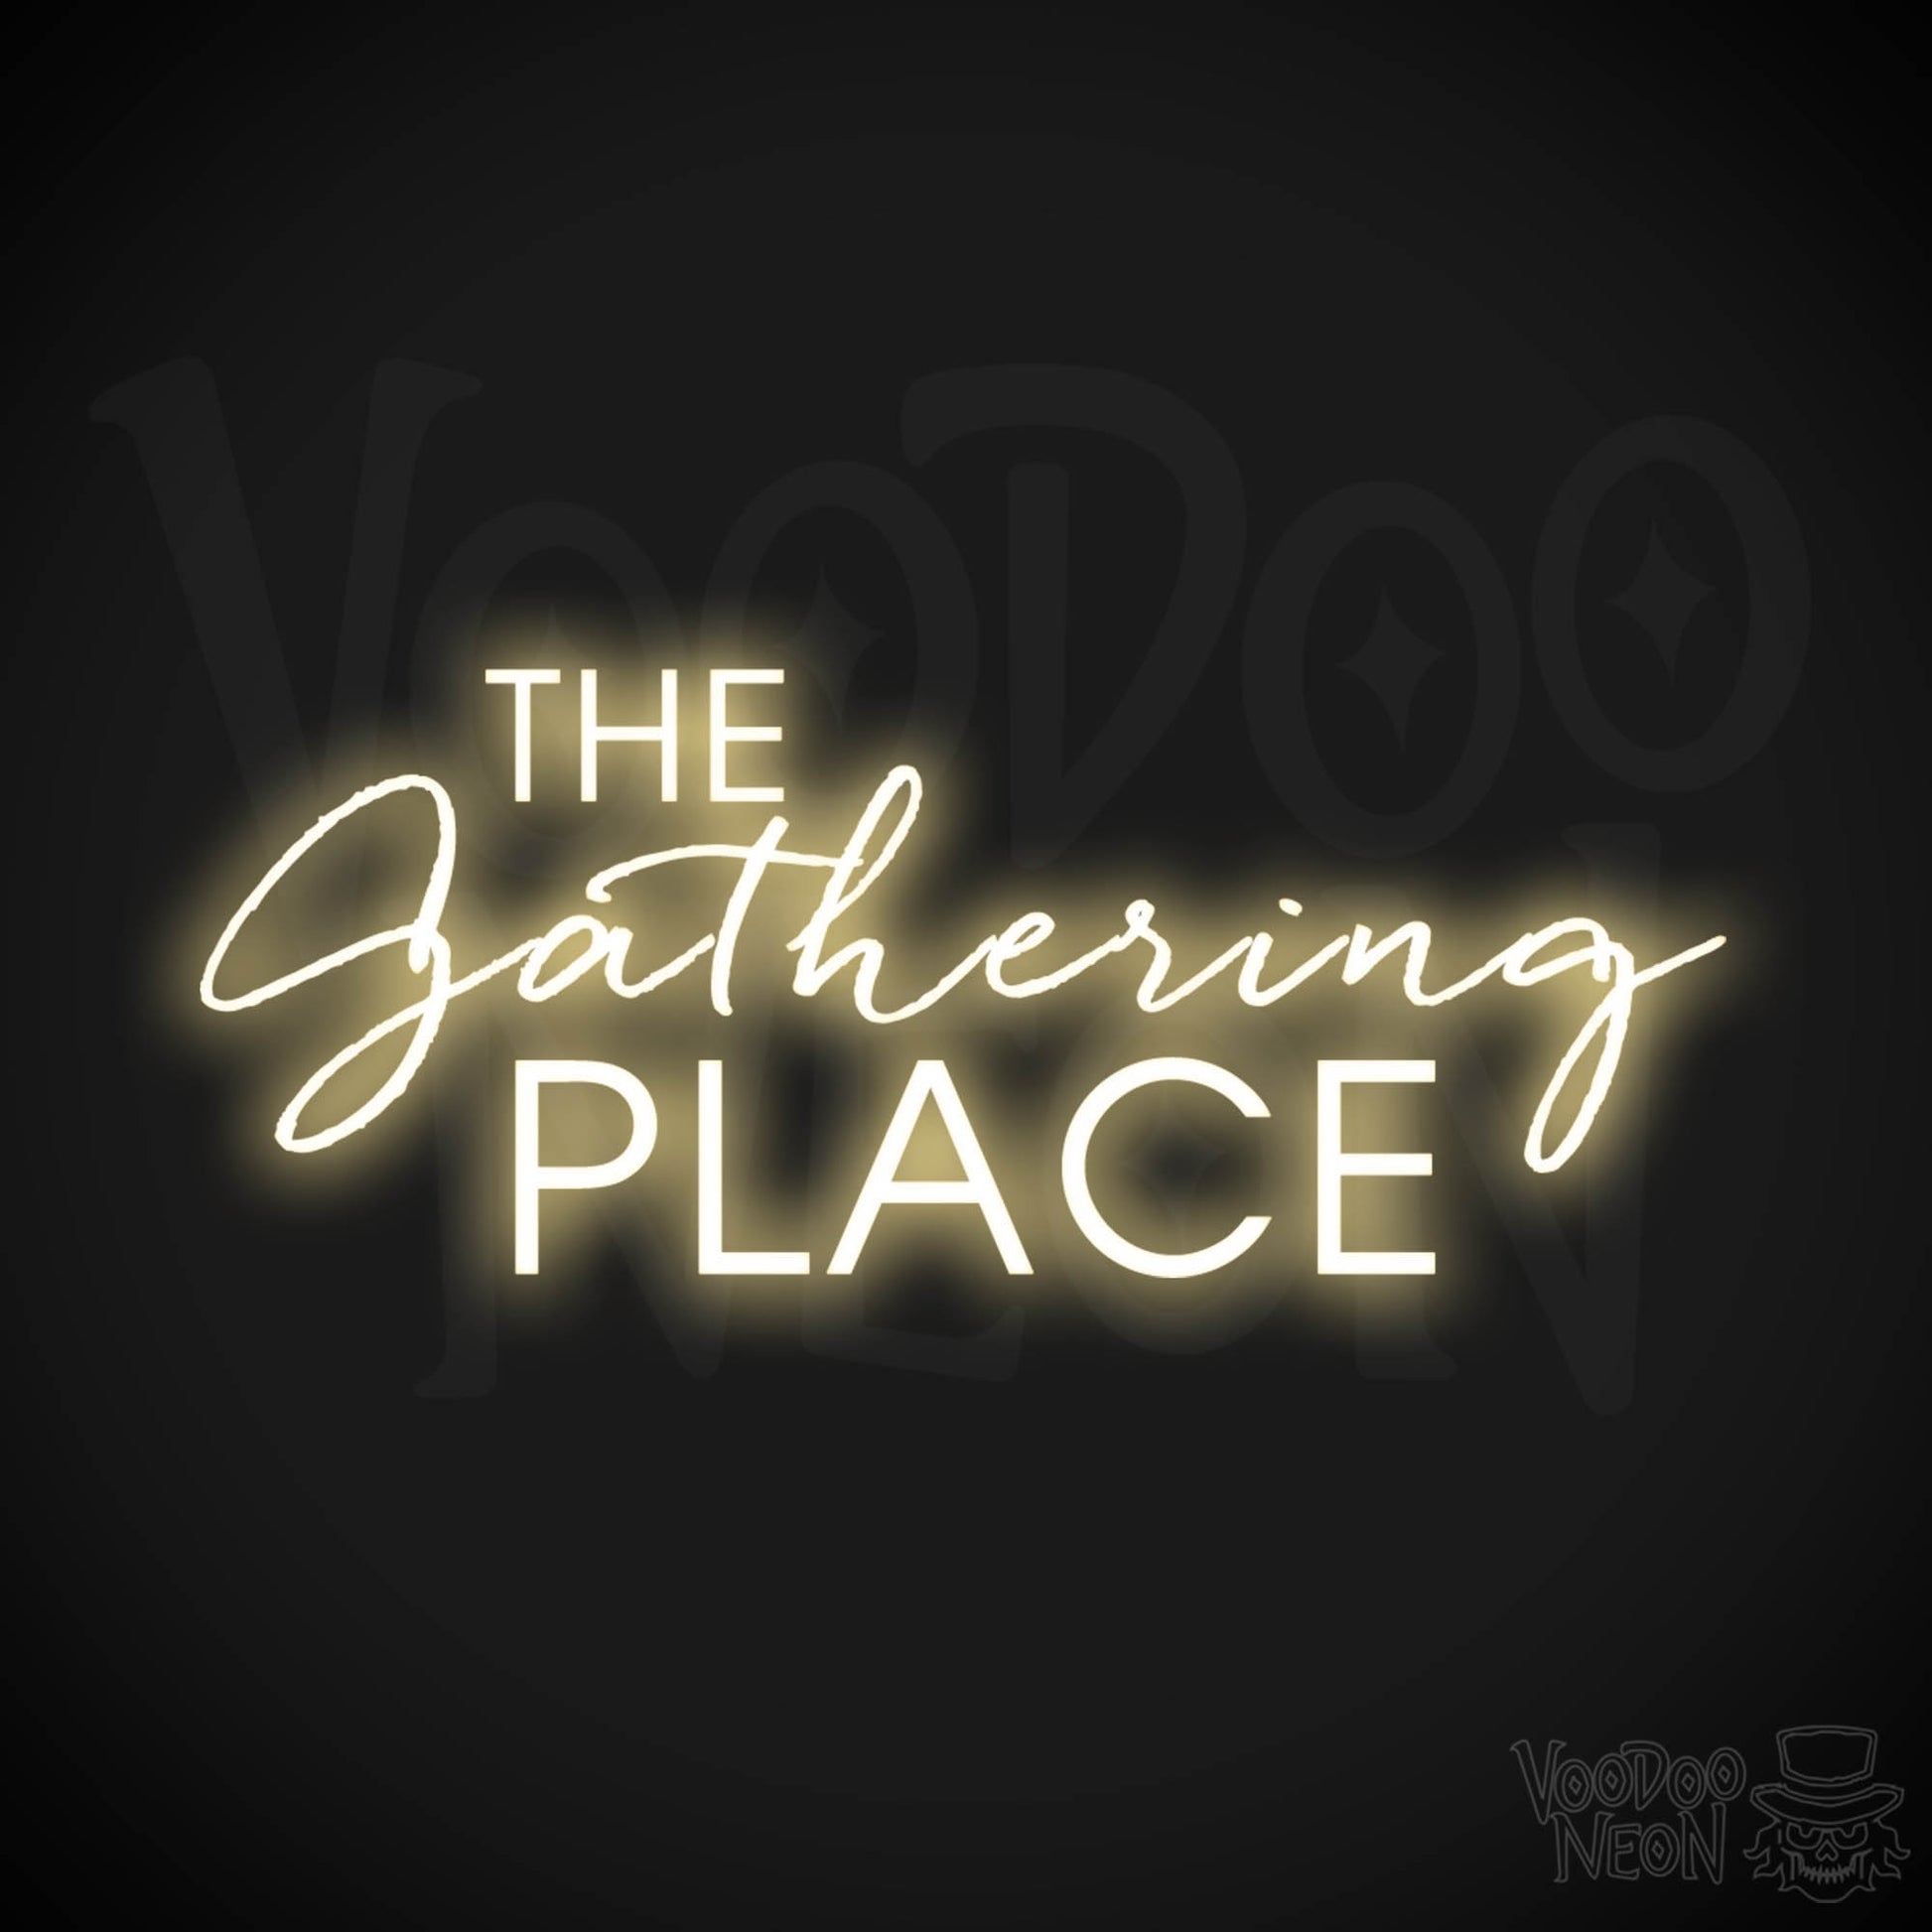 The Gathering Place Neon Sign - Neon The Gathering Place Sign - Wall Art - Color Warm White